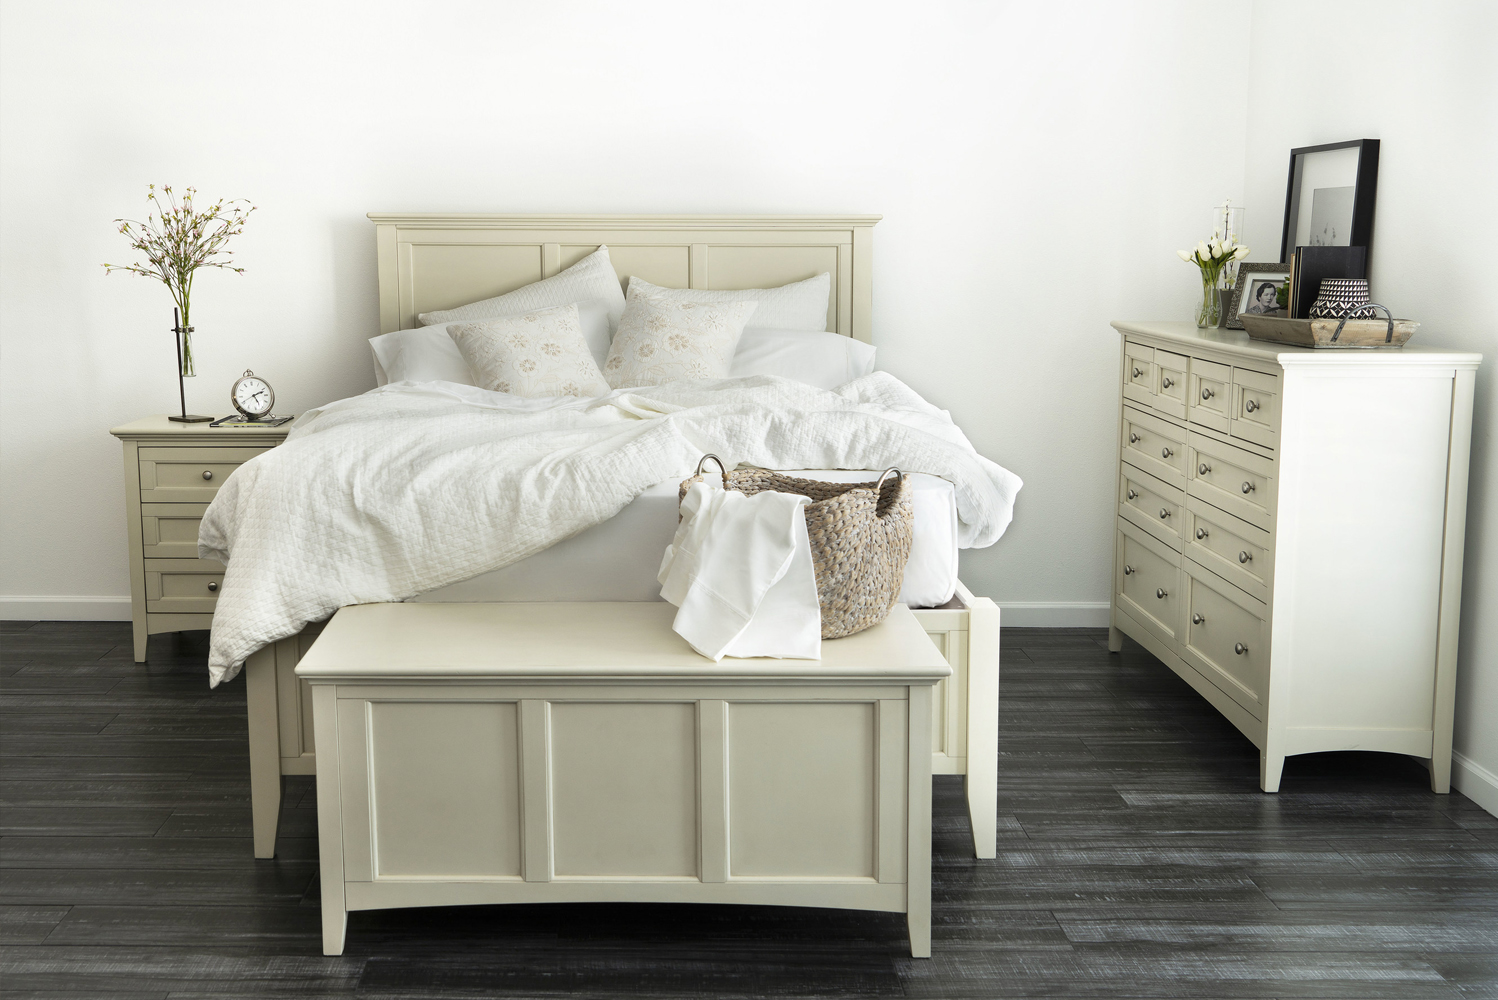 Brooklyn Bedding added new GOTS certified 100 organic cotton sheets to its EcoSleep collection 